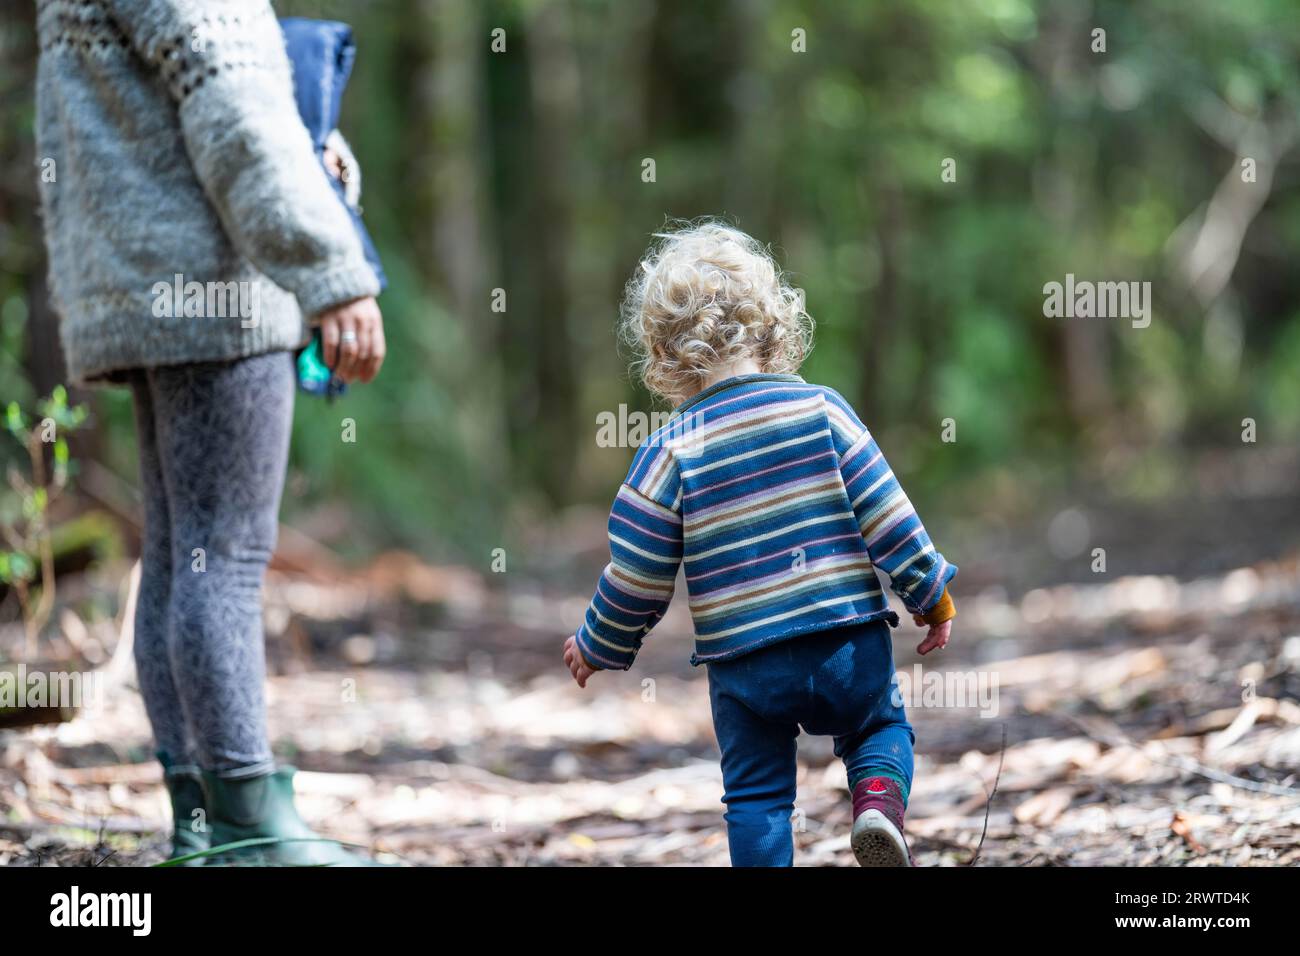 Mother with baby in a carrier on her chest on a hike, taking a bush walk in Summer in a national park Stock Photo